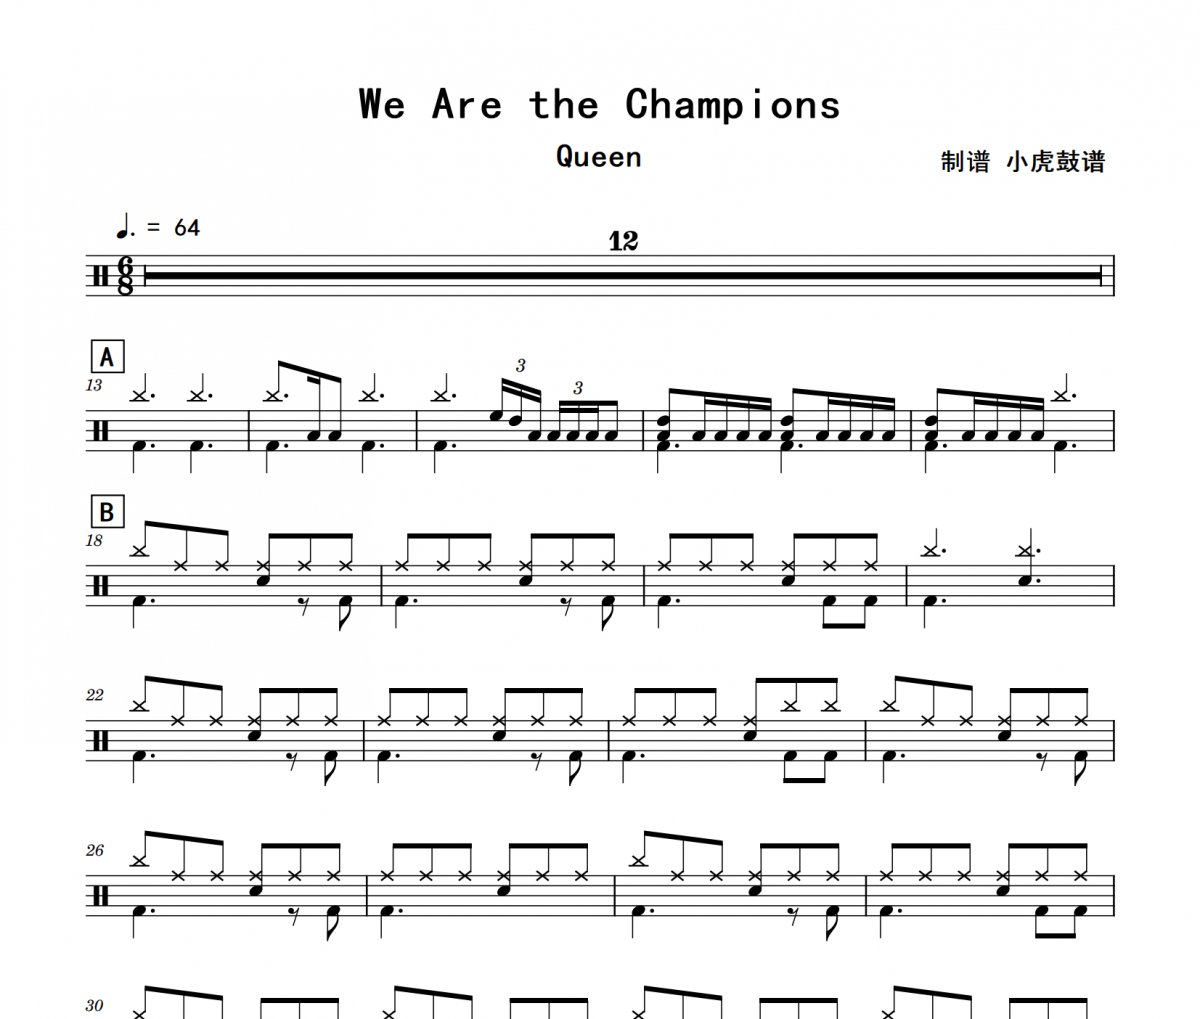 We Are the Champions鼓谱 Queen《We Are the Champions》架子鼓谱+动态视频